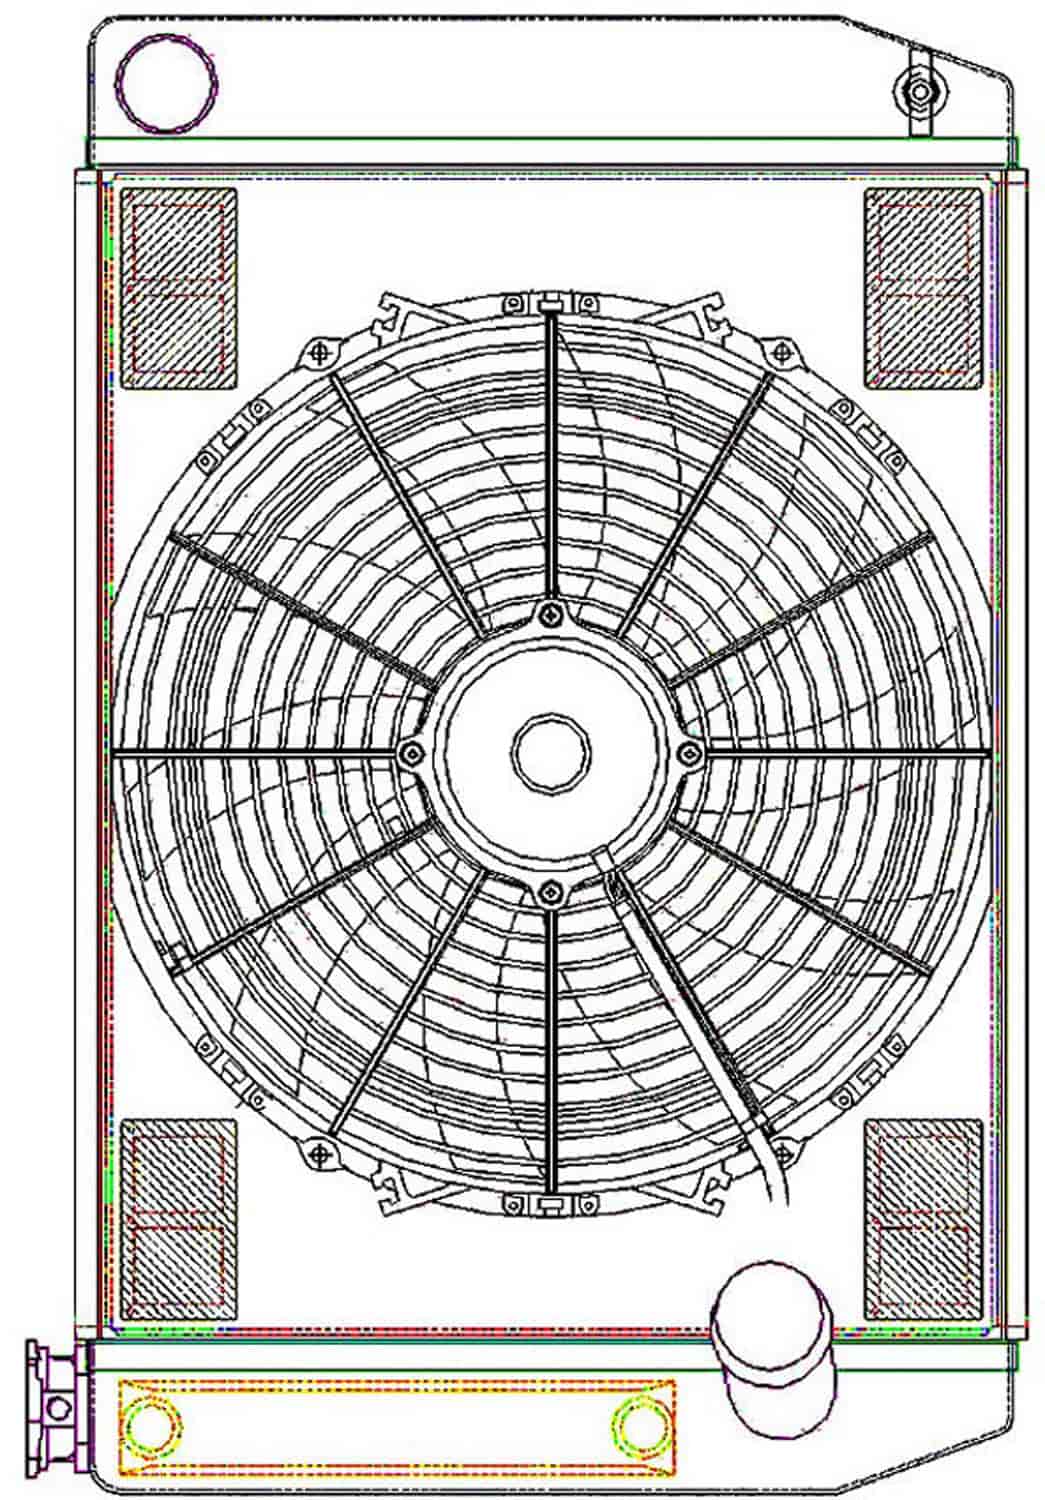 ClassicCool ComboUnit Universal Fit Radiator and Fan Single Pass Crossflow Design 24" x 15.50" with Transmission Cooler